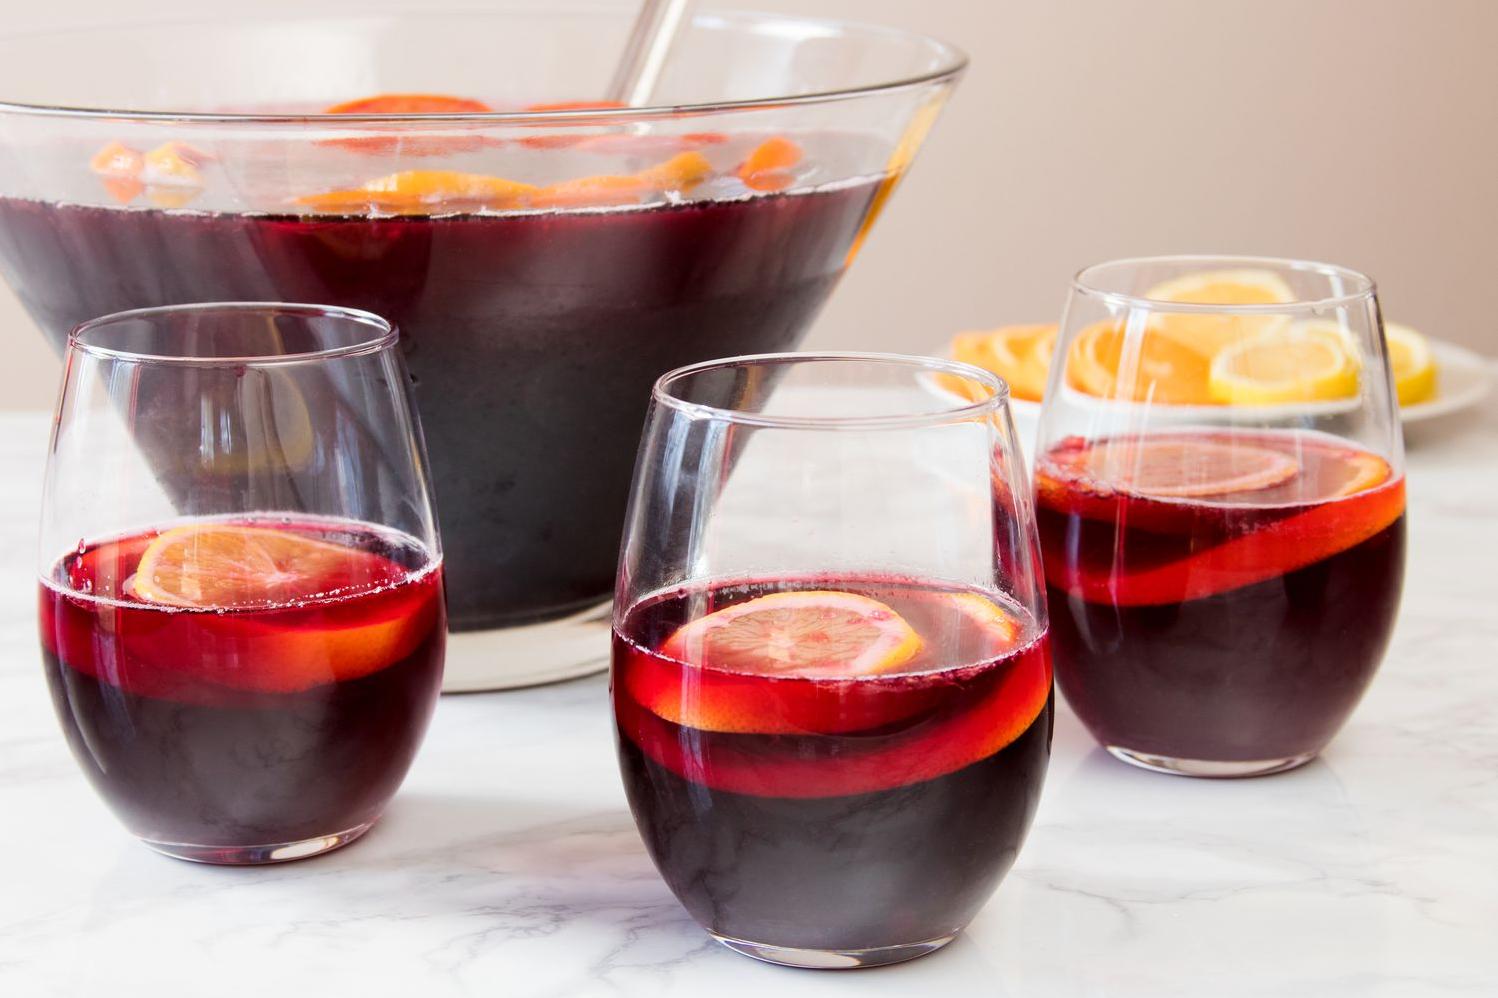  Nothing compares to a warm mug of this brandy-wine punch on a cold winter night.